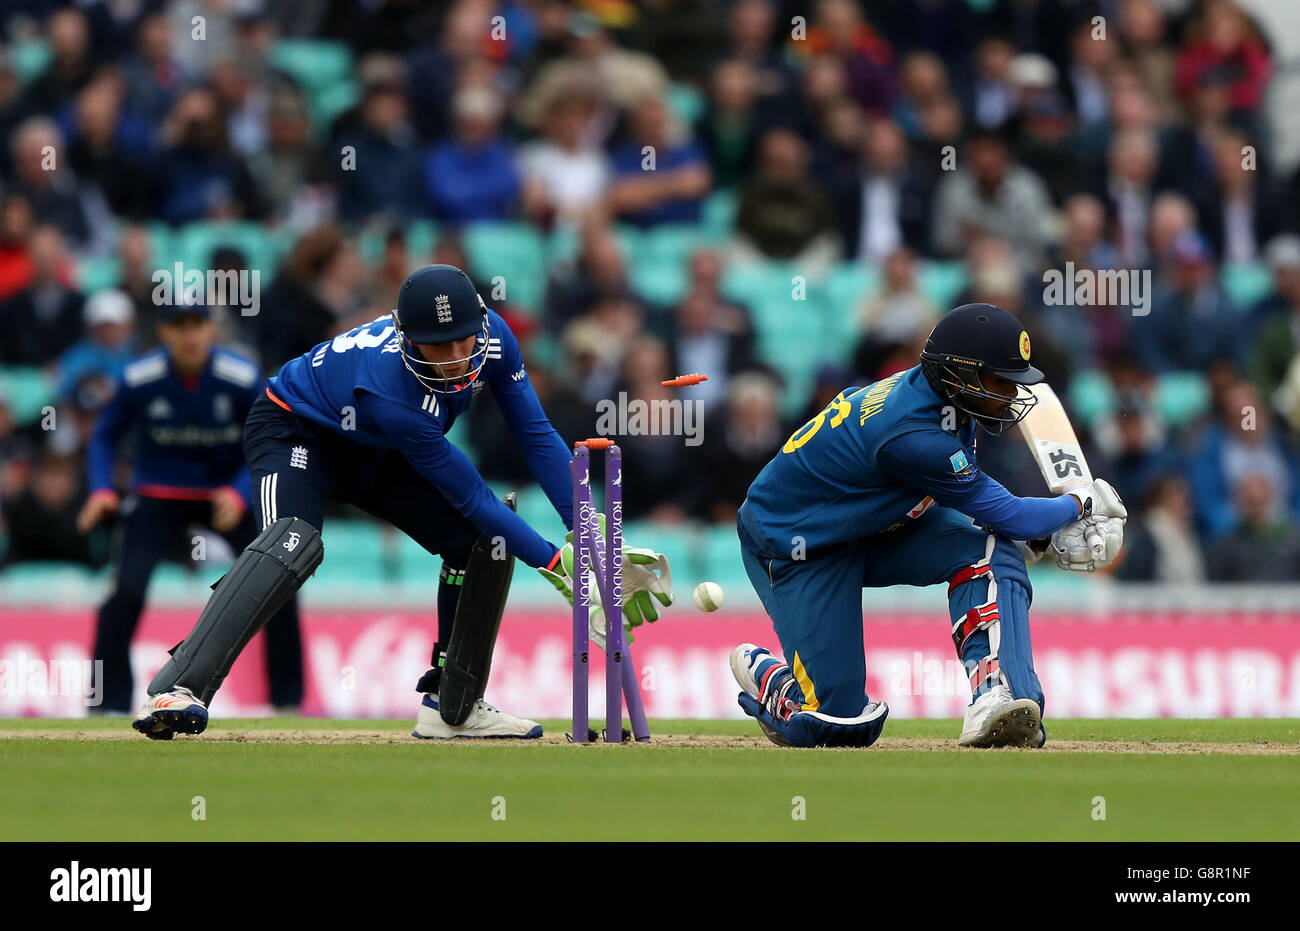 Sri Lanka's Dinesh Chandimal is bowled out by England's David Willey during the Royal London One Day International Series at the Kia Oval, London. Stock Photo